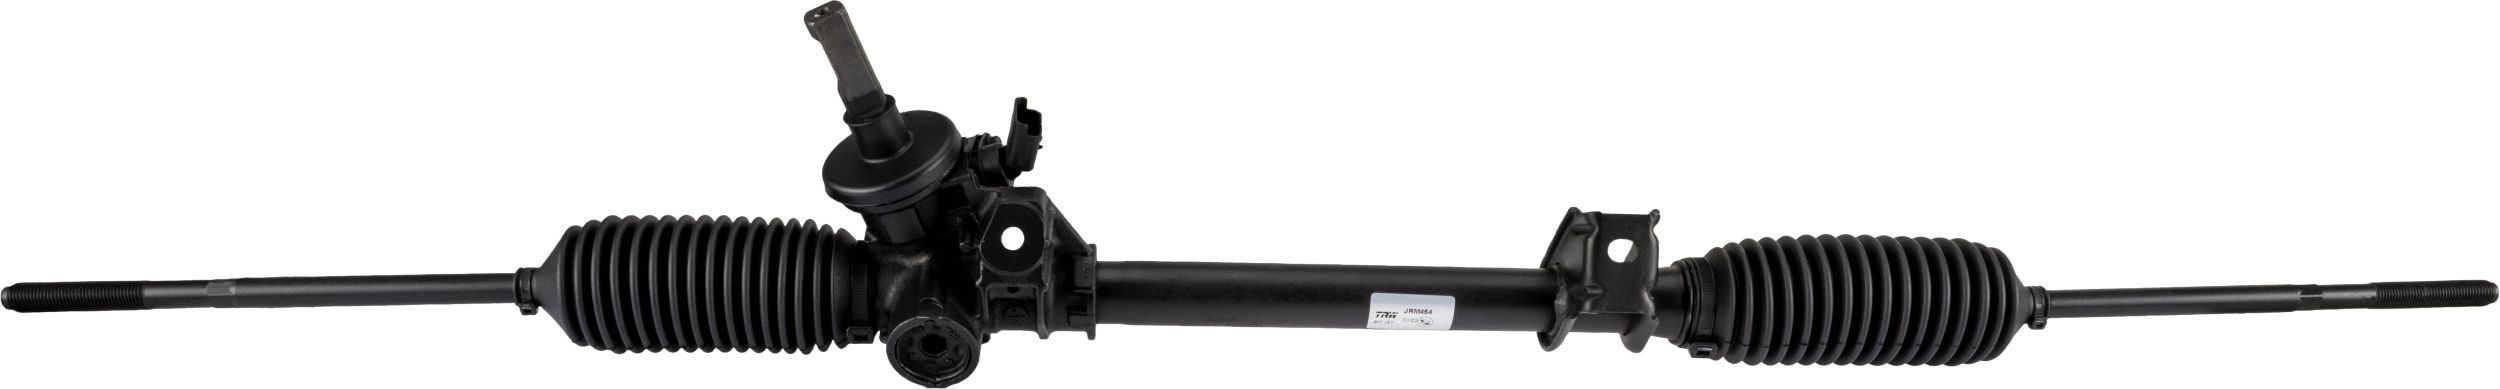 TRW JRM454 Steering rack Mechanical, for left-hand drive vehicles, untoothed, 1110 mm